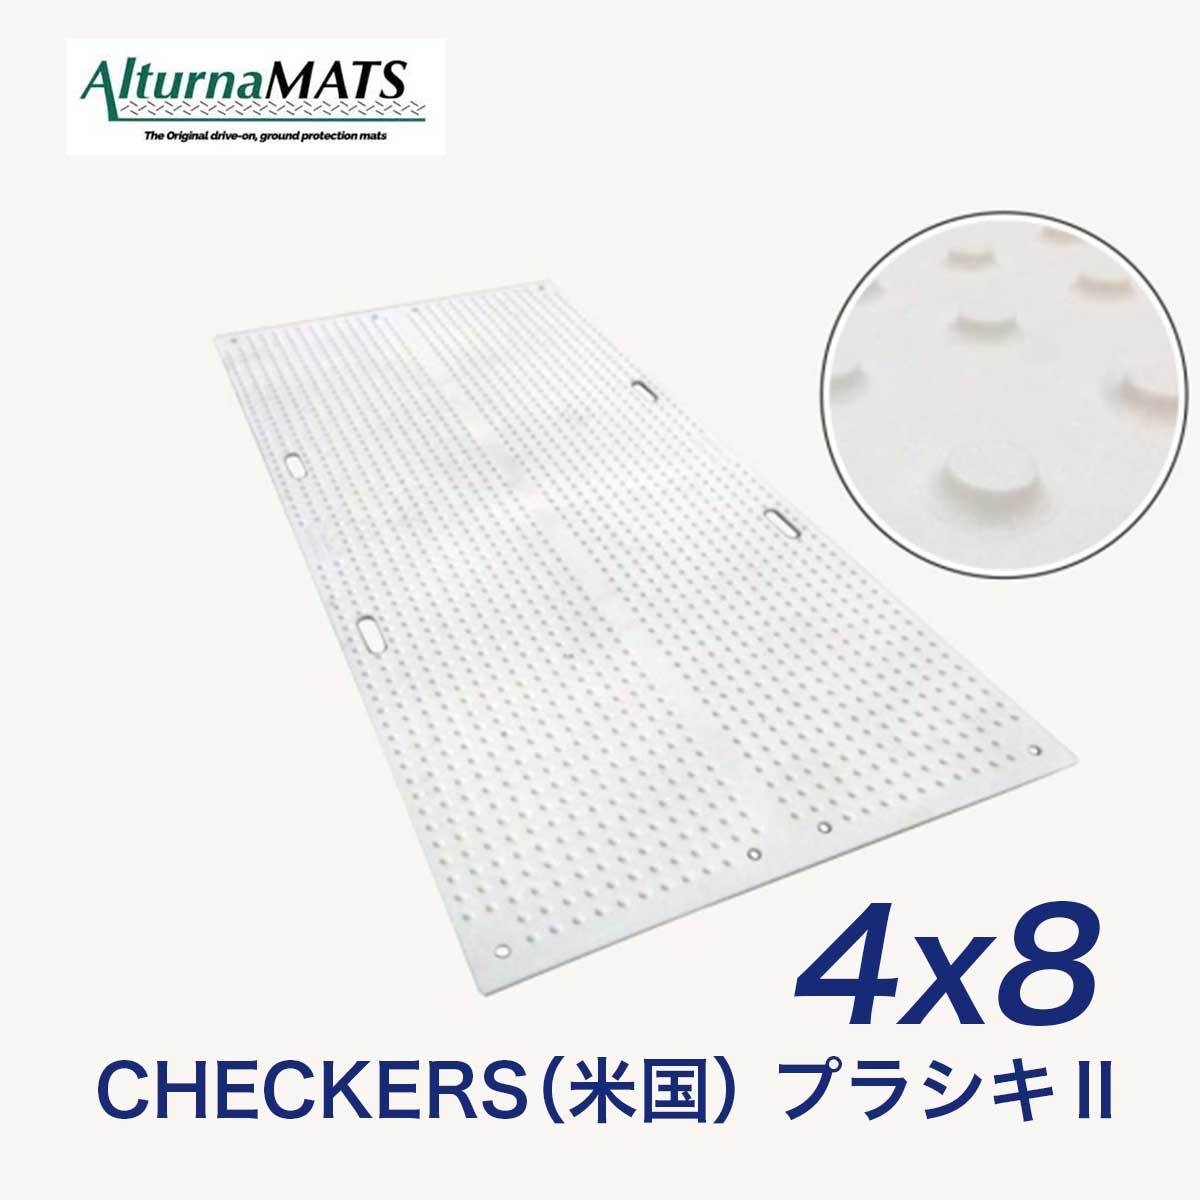 CHECKERS（米国）プラシキII 4×8 白 50枚セット